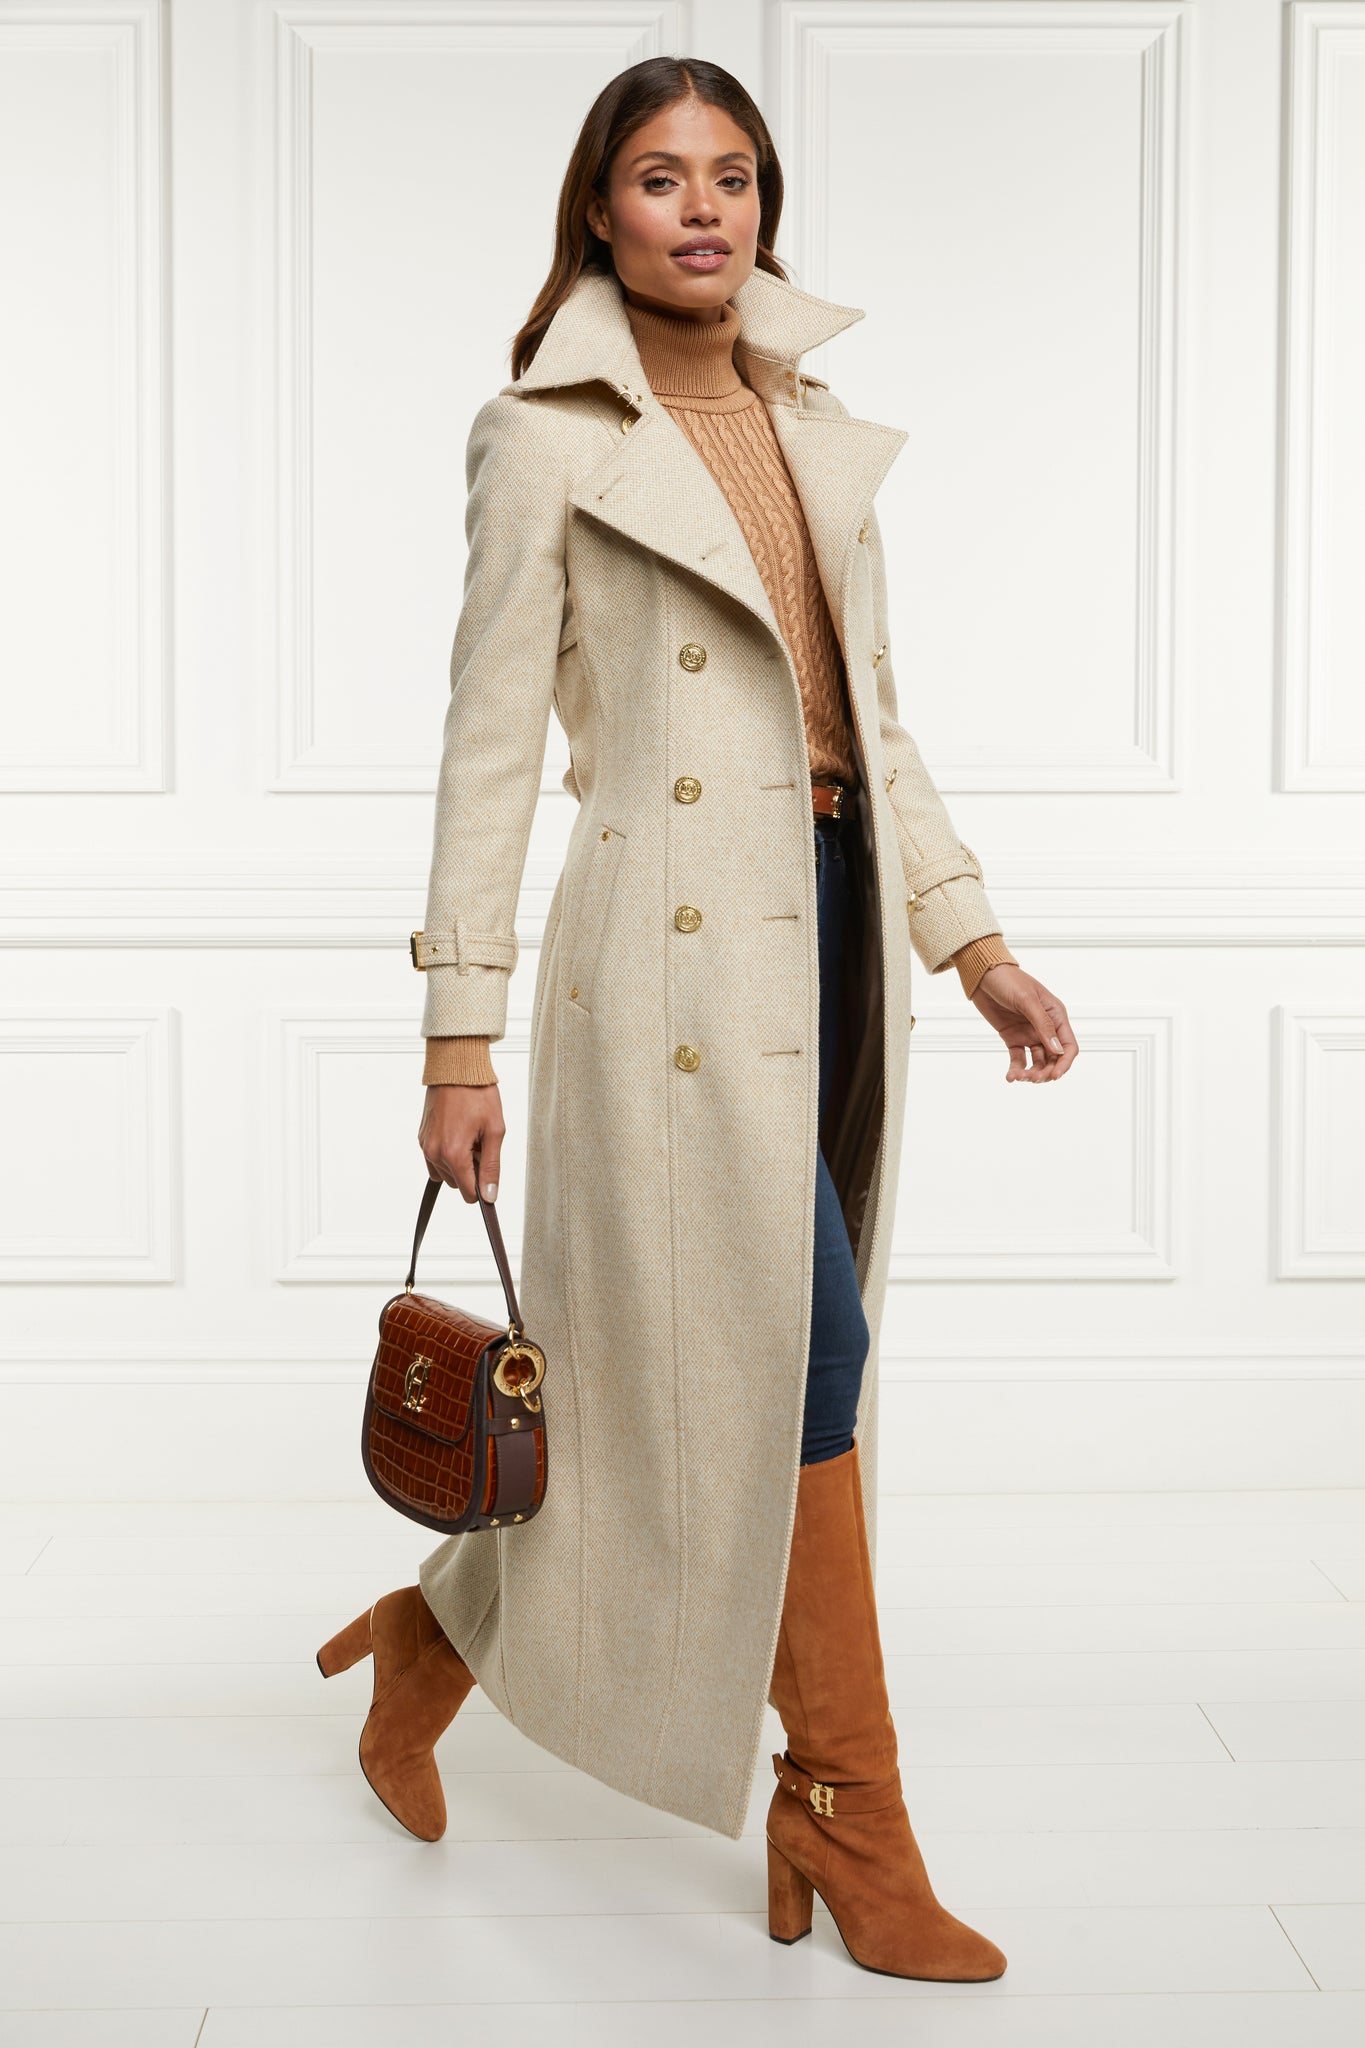 womens camel and cream weave wool double breasted full length trench coat with tan croc embossed leather saddle bag